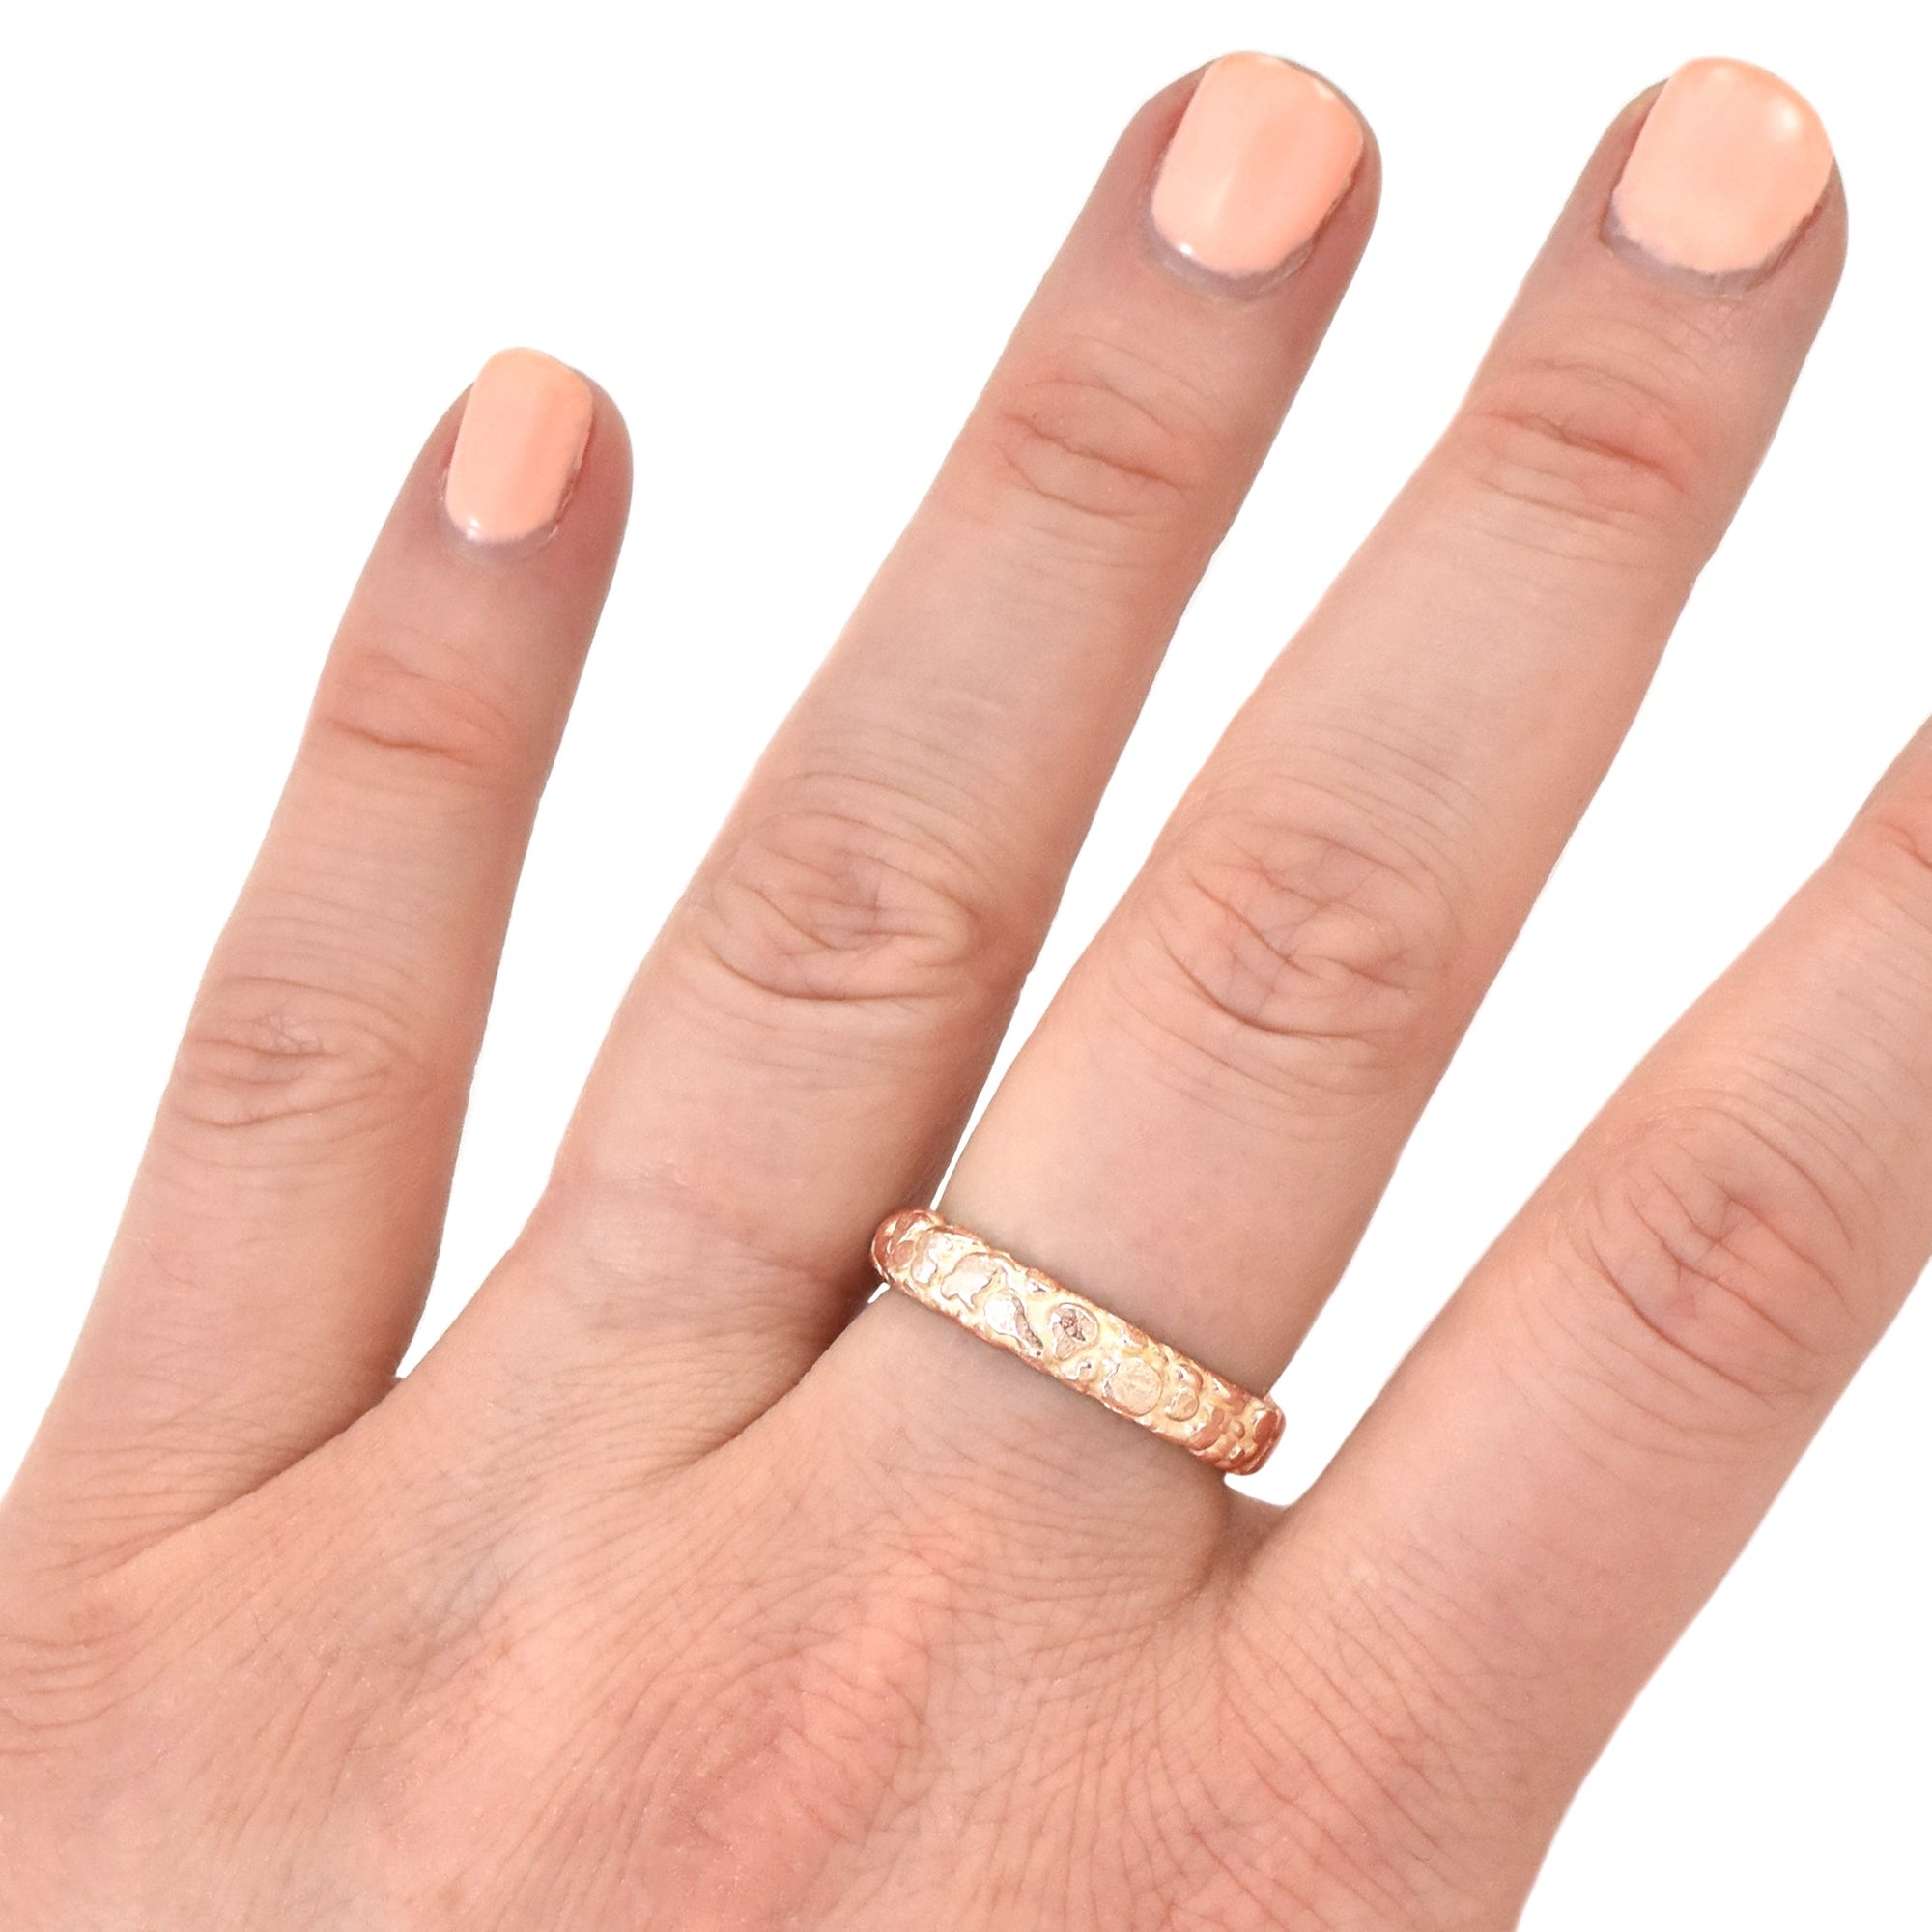 Gold Pebble Beach Ring - your choice of gold - Wedding Ring  18K Palladium White Gold  14K Rose Gold 6365 - handmade by Beth Millner Jewelry